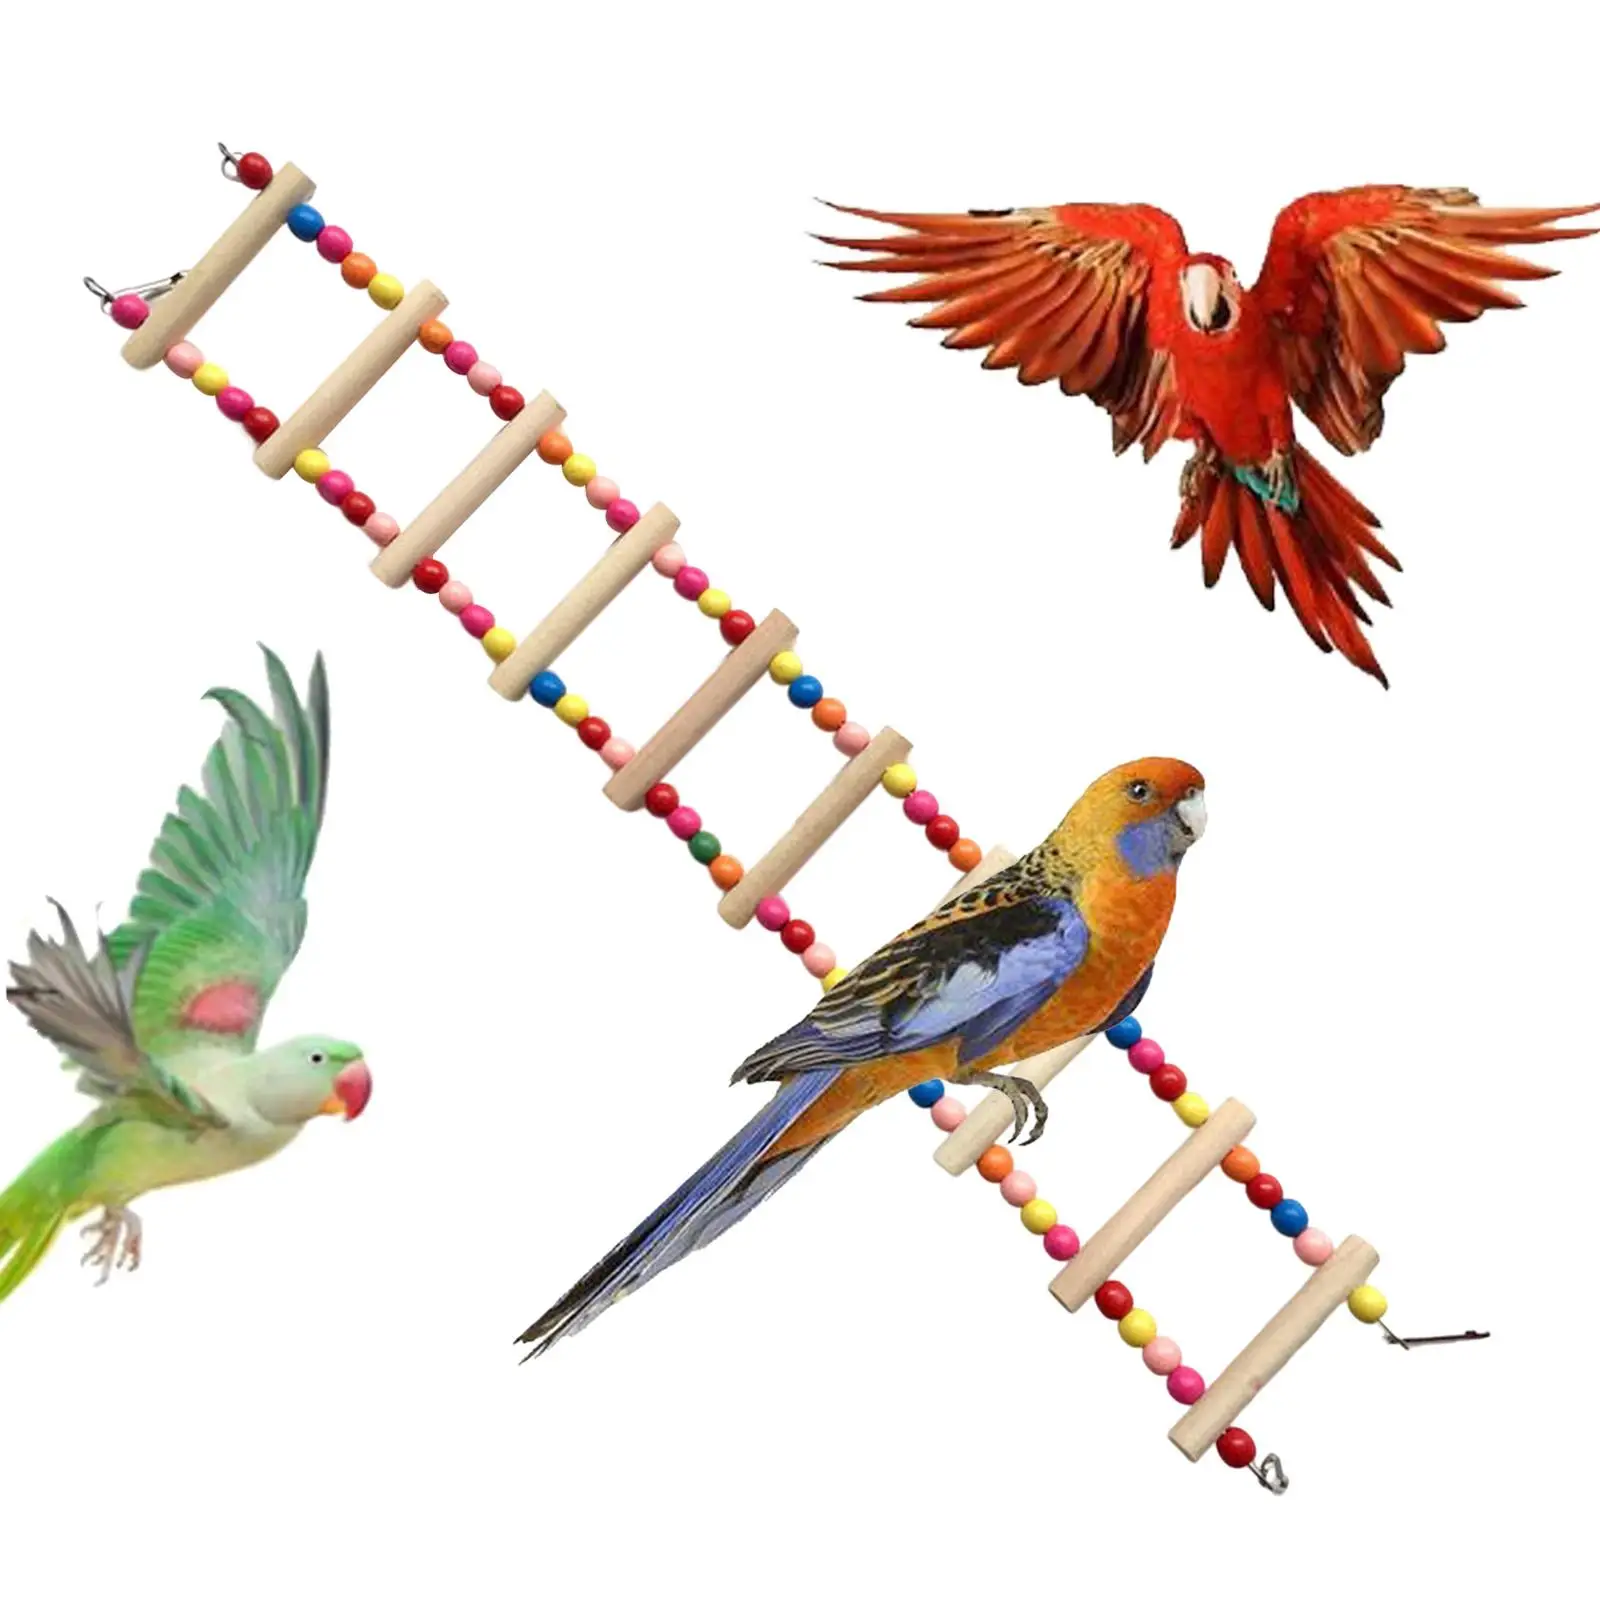 bird Bridge Ladder Climbing Parrots Swing Encourages Foot Exercise for Cockatiels Parakeets Conures Finches Small Parakeets